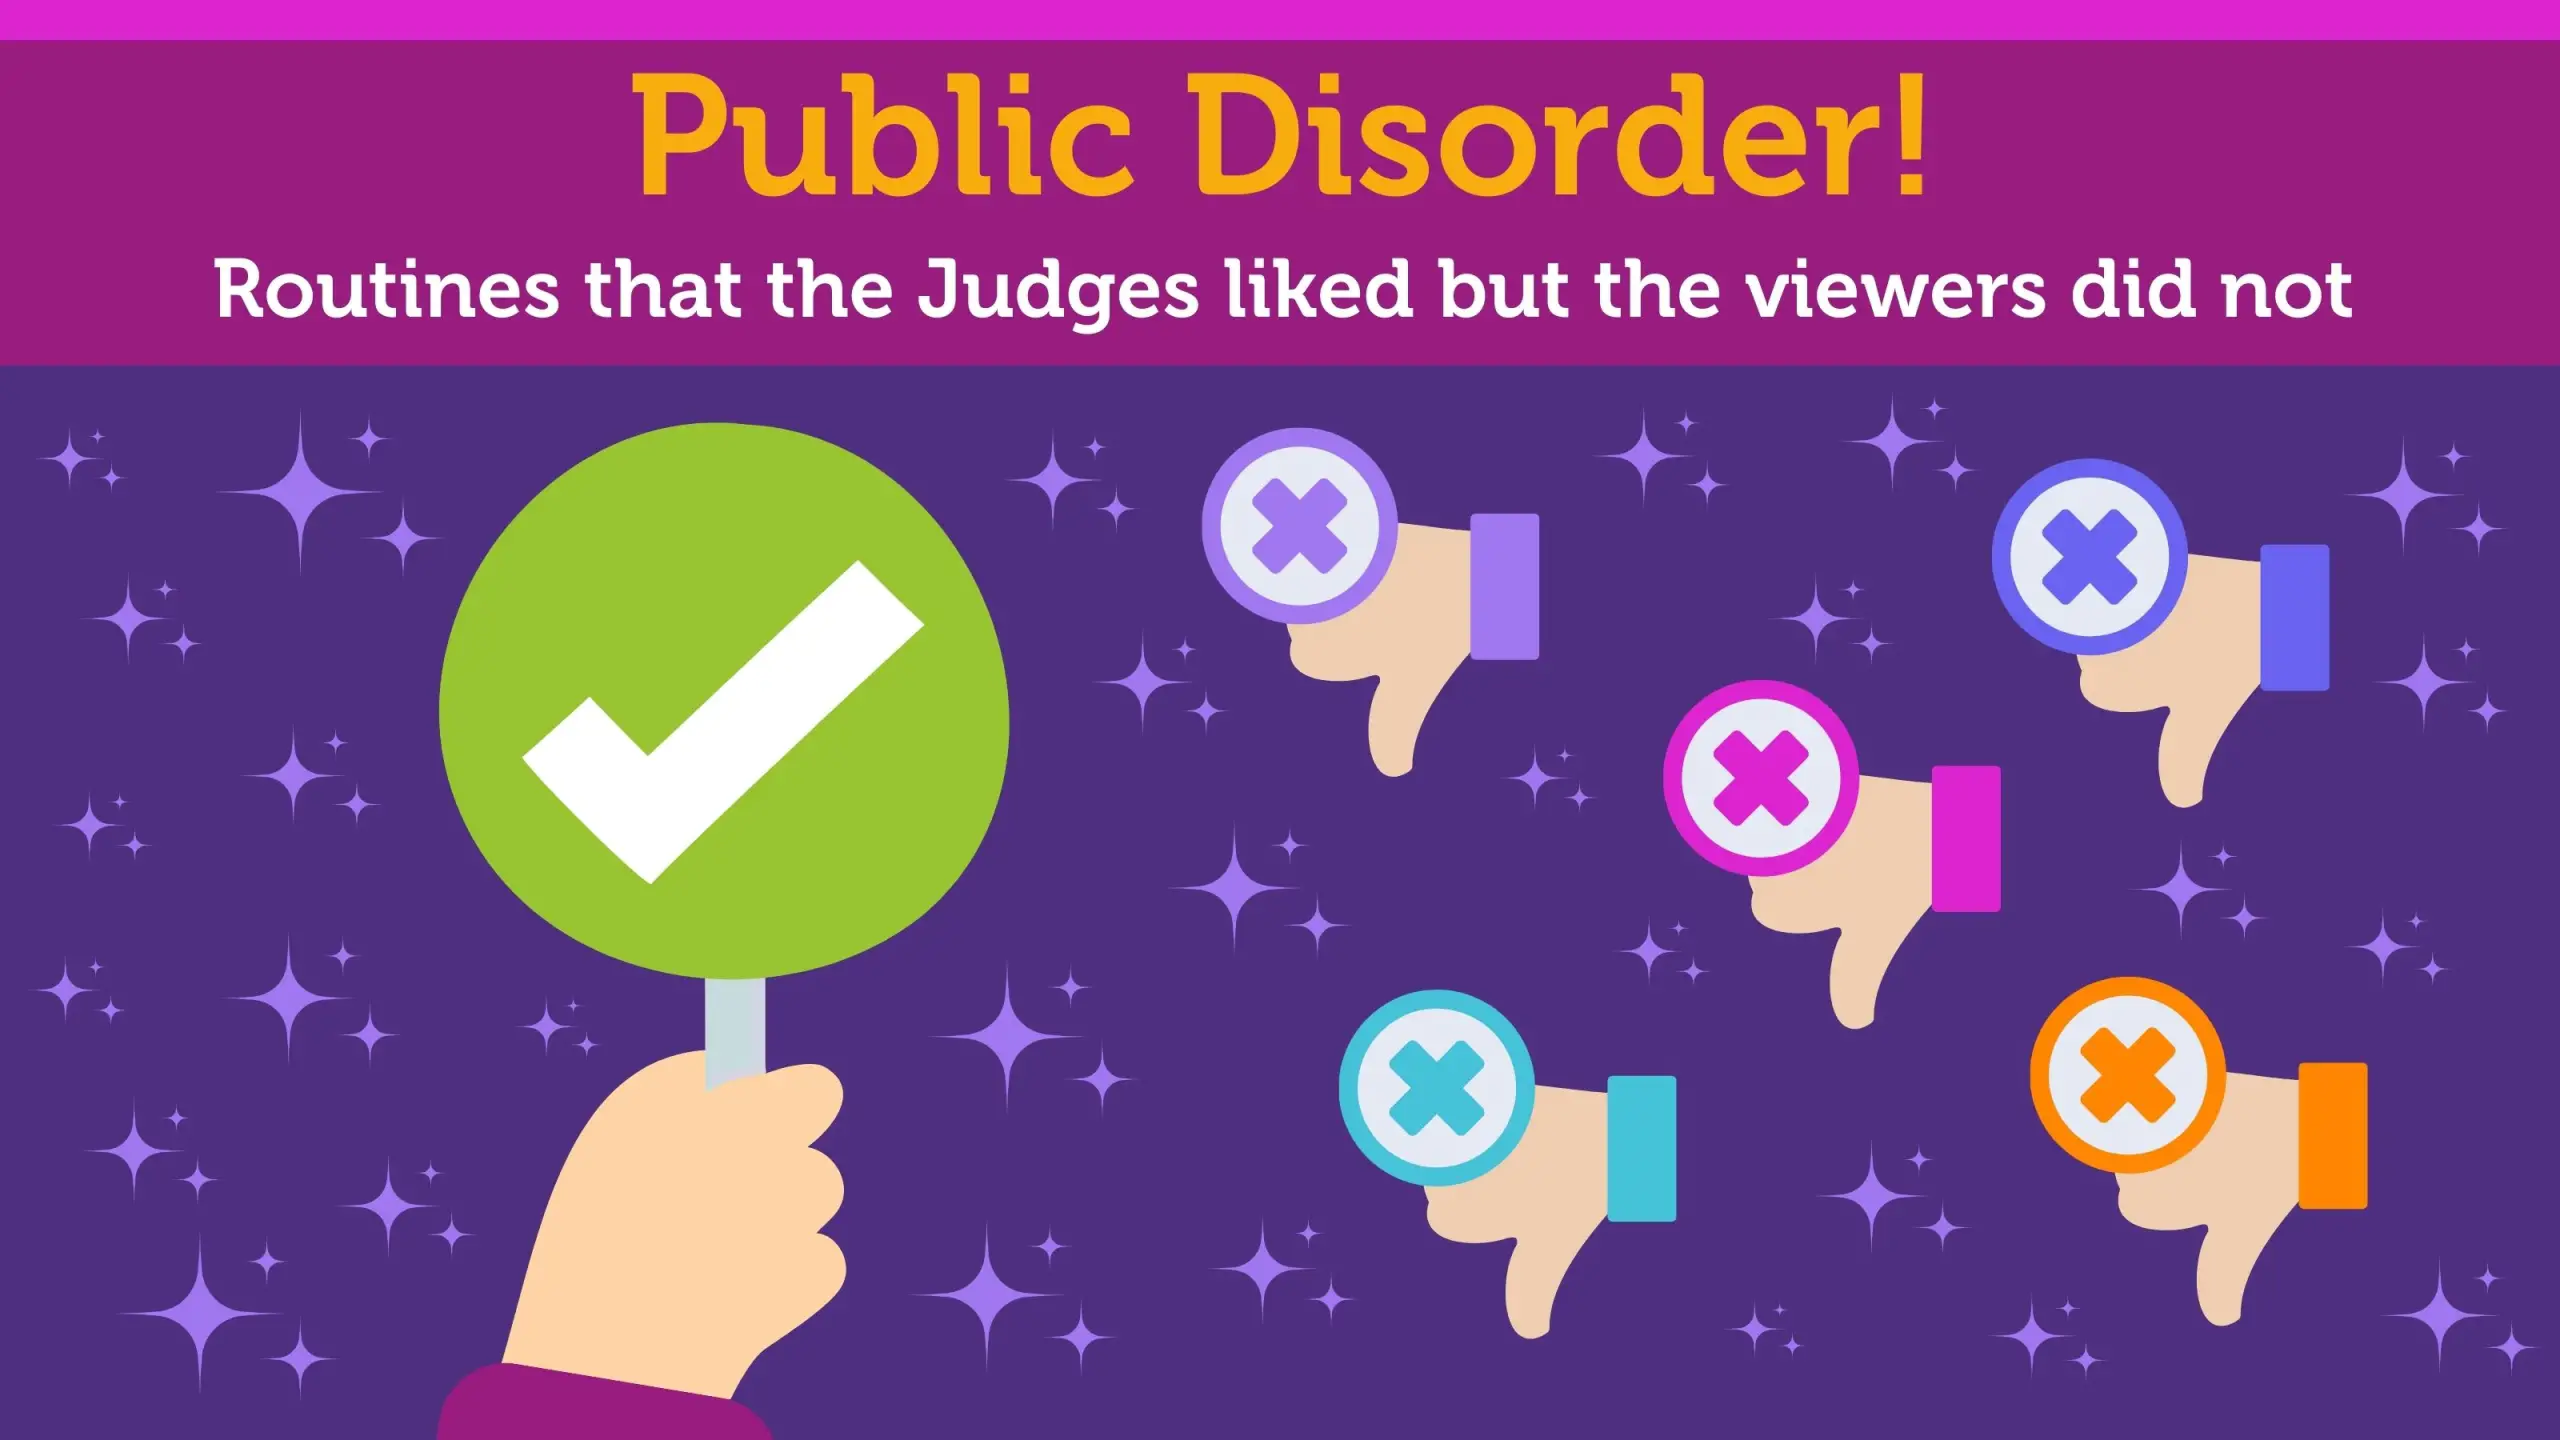 Public Disorder! Routines that the Judges liked but the viewers did not